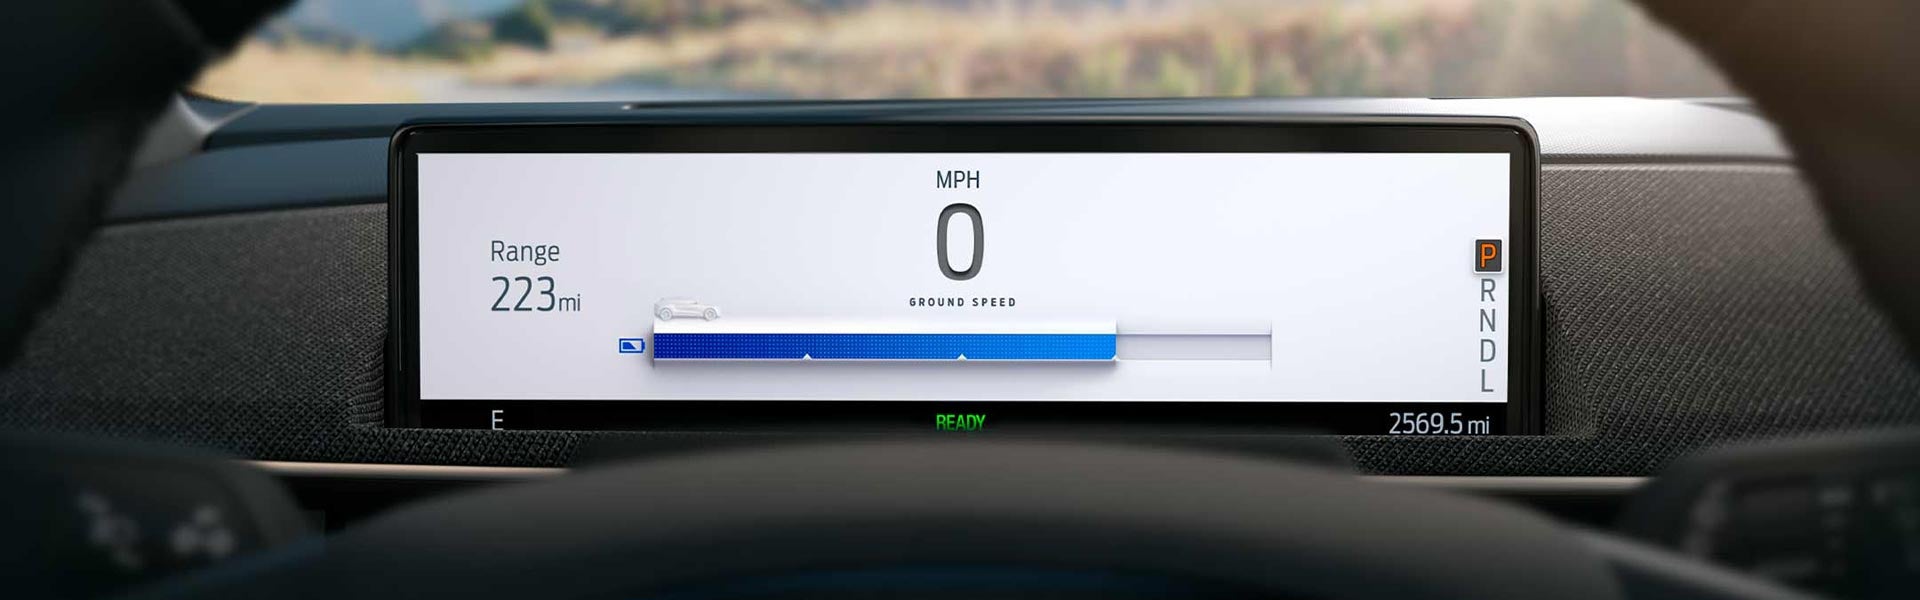 The Dashboard of a Ford Electric Vehicle